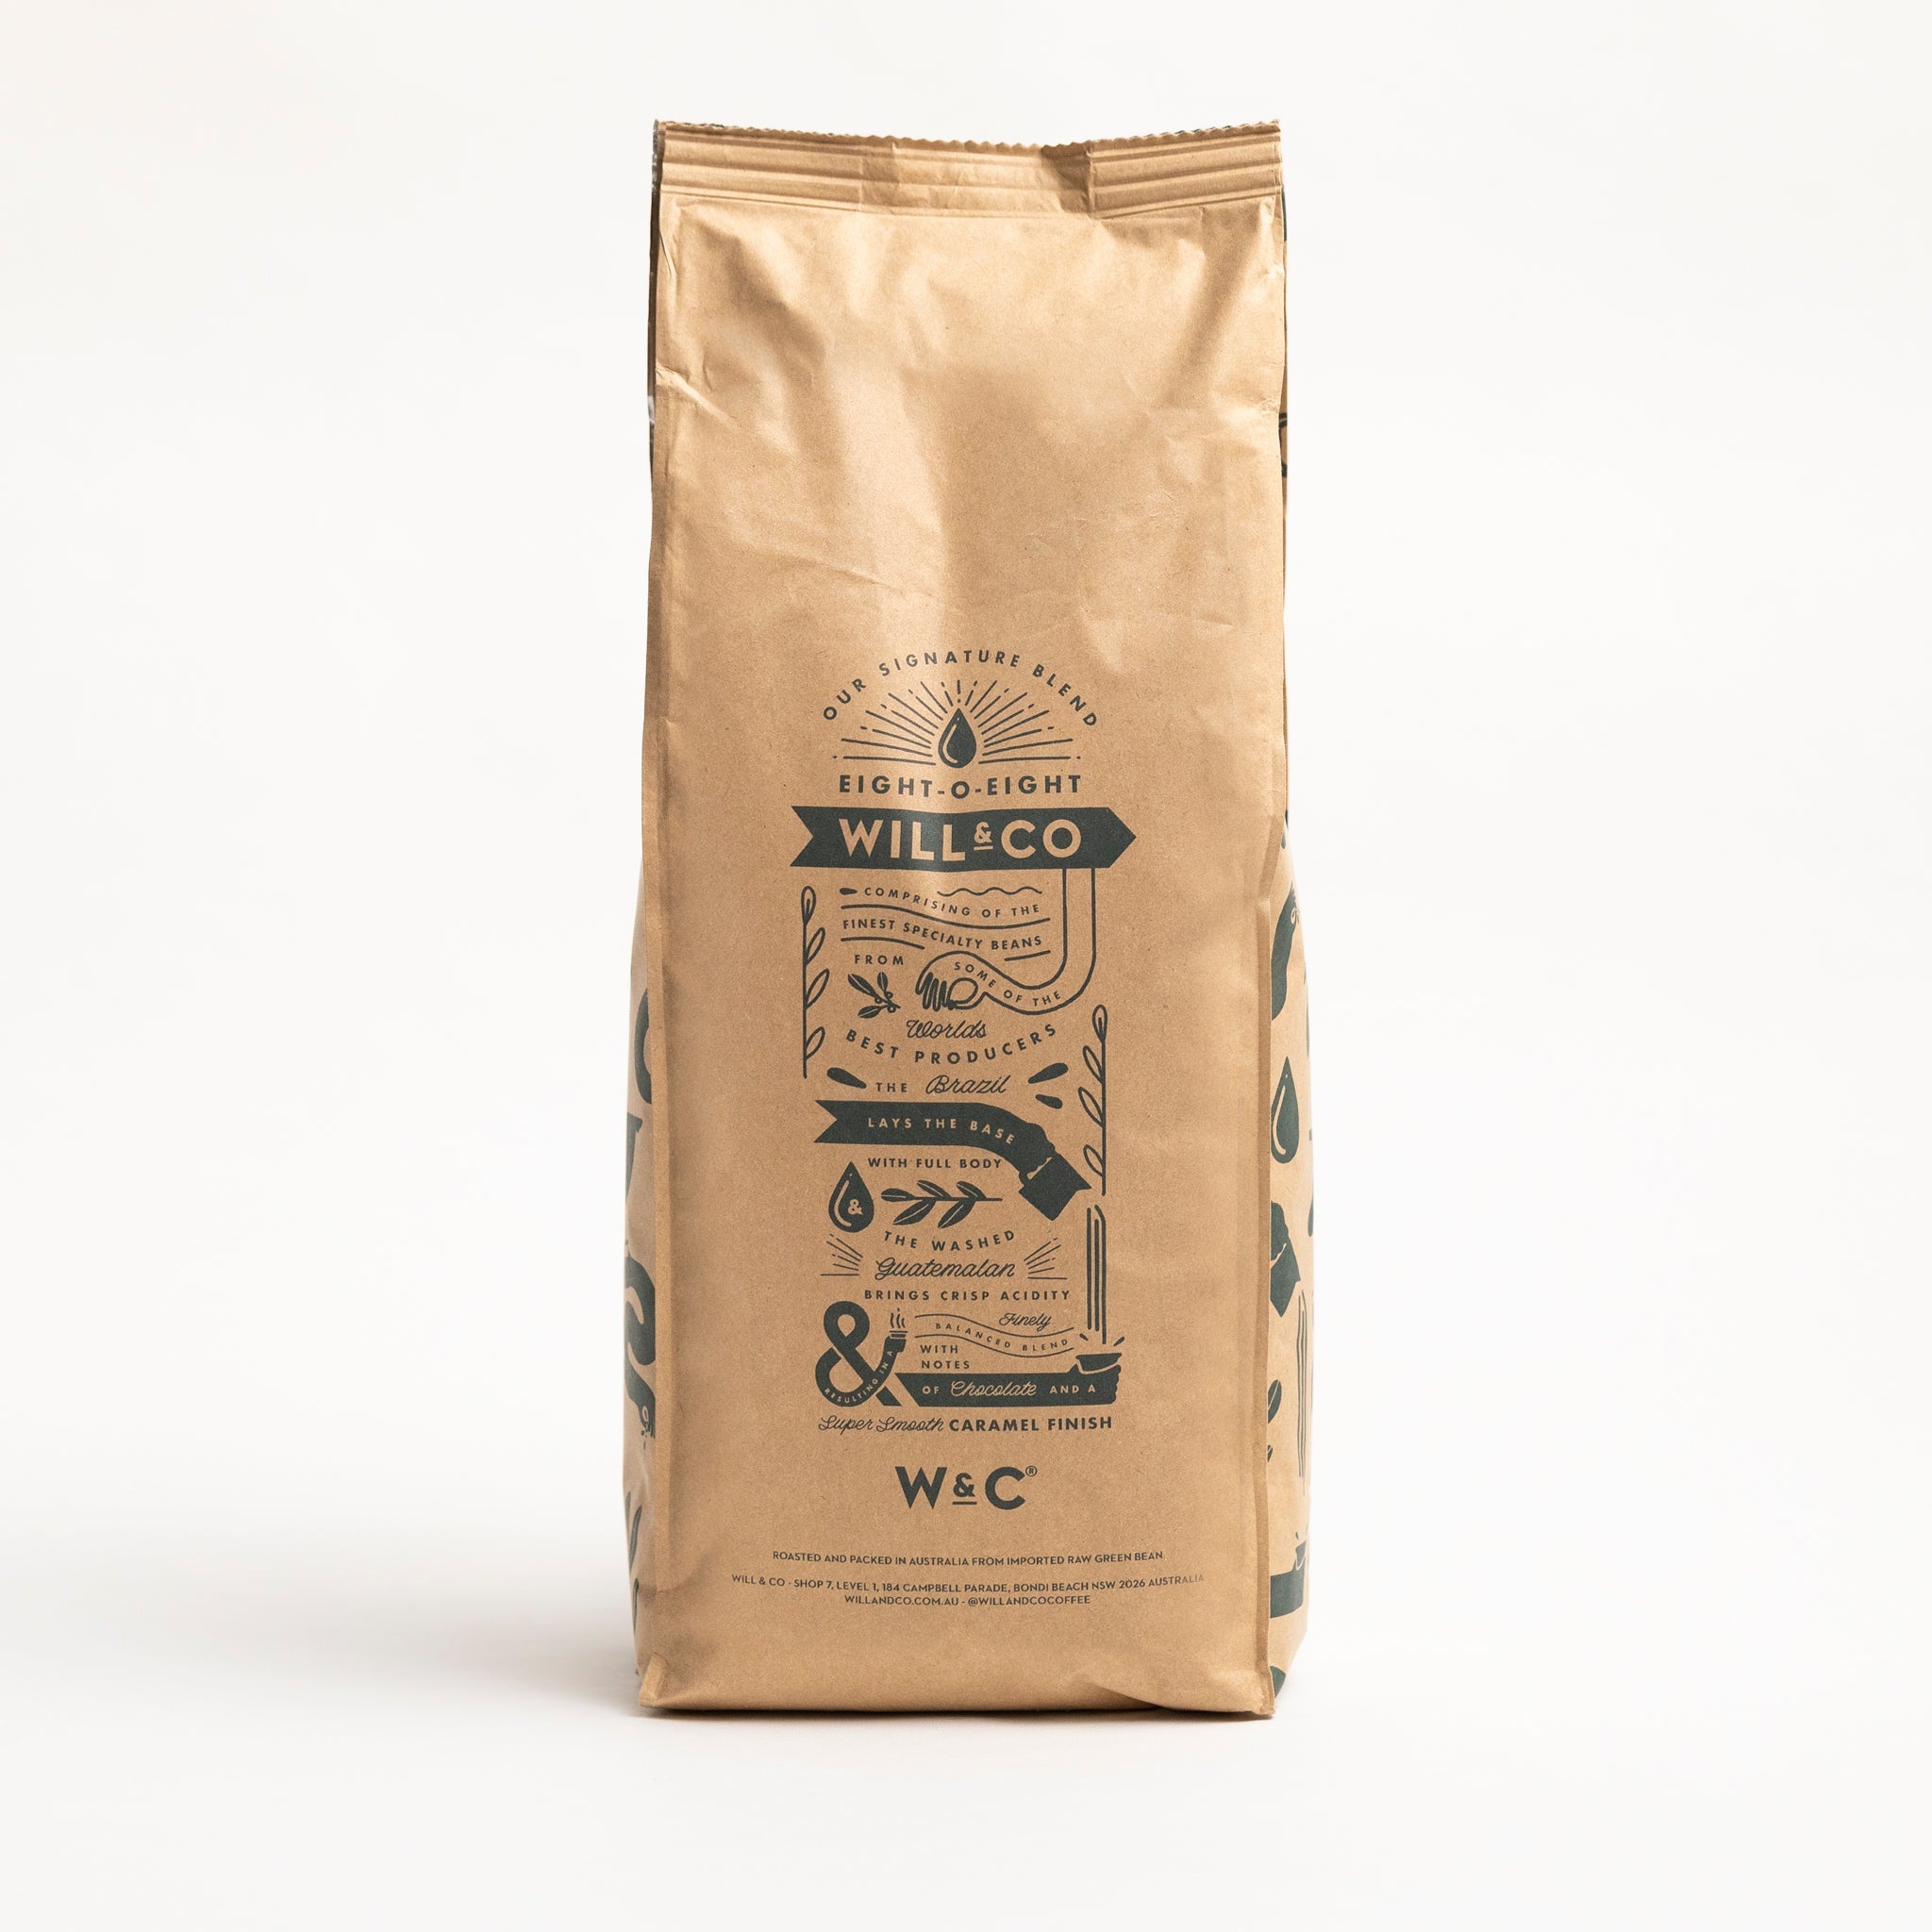 Eight-O-Eight 1kg Coffee Beans - Will & Co Coffee